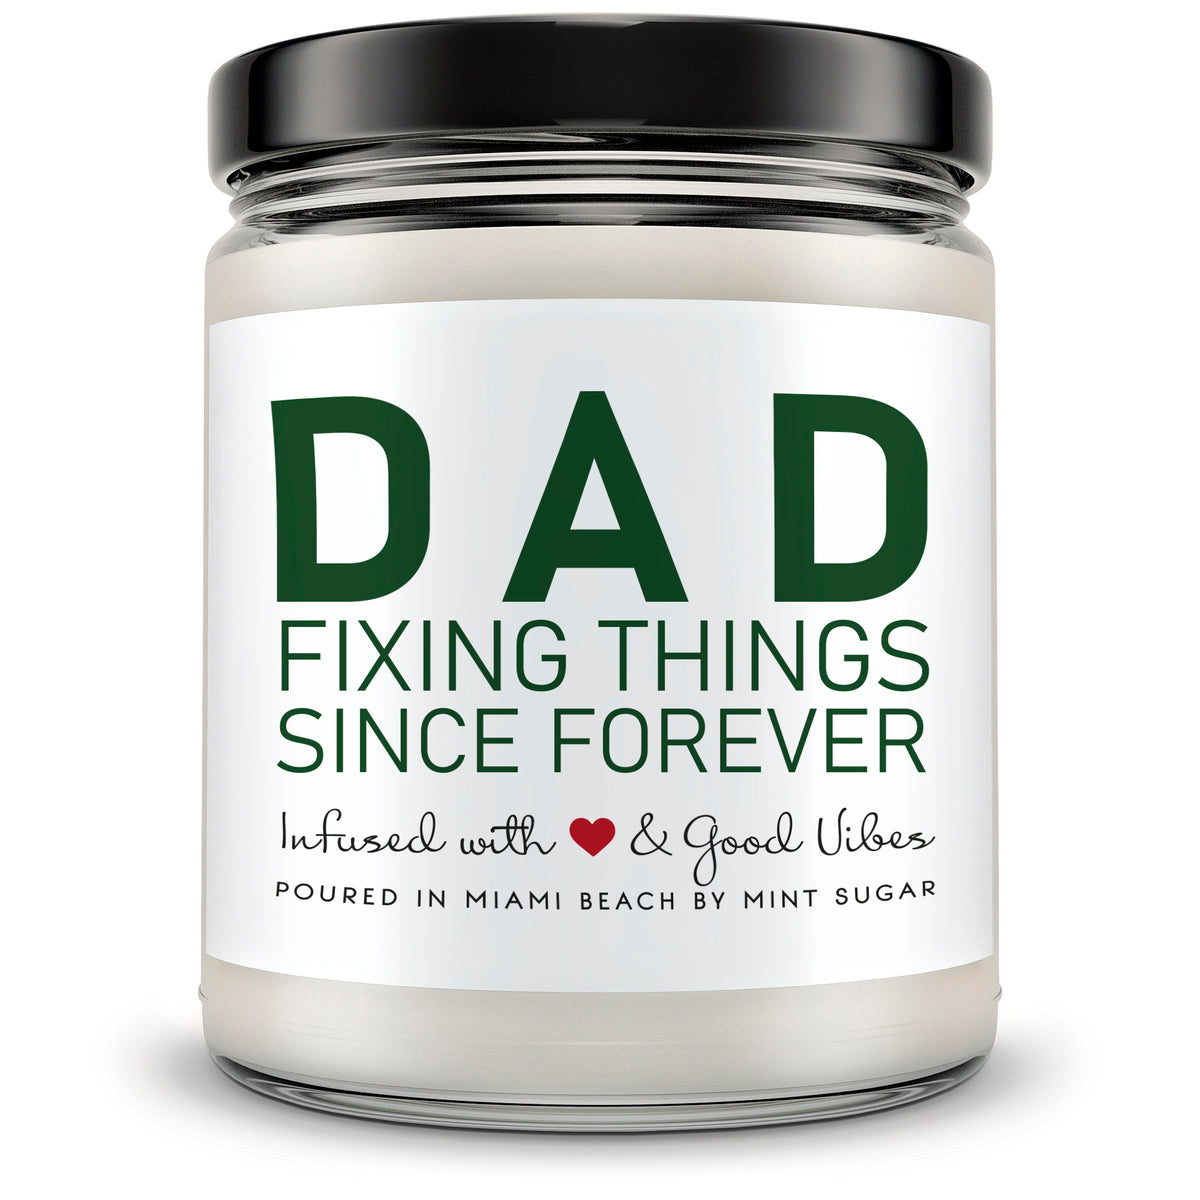 Dad Fixing Things Since Forever - Mint Sugar Candle